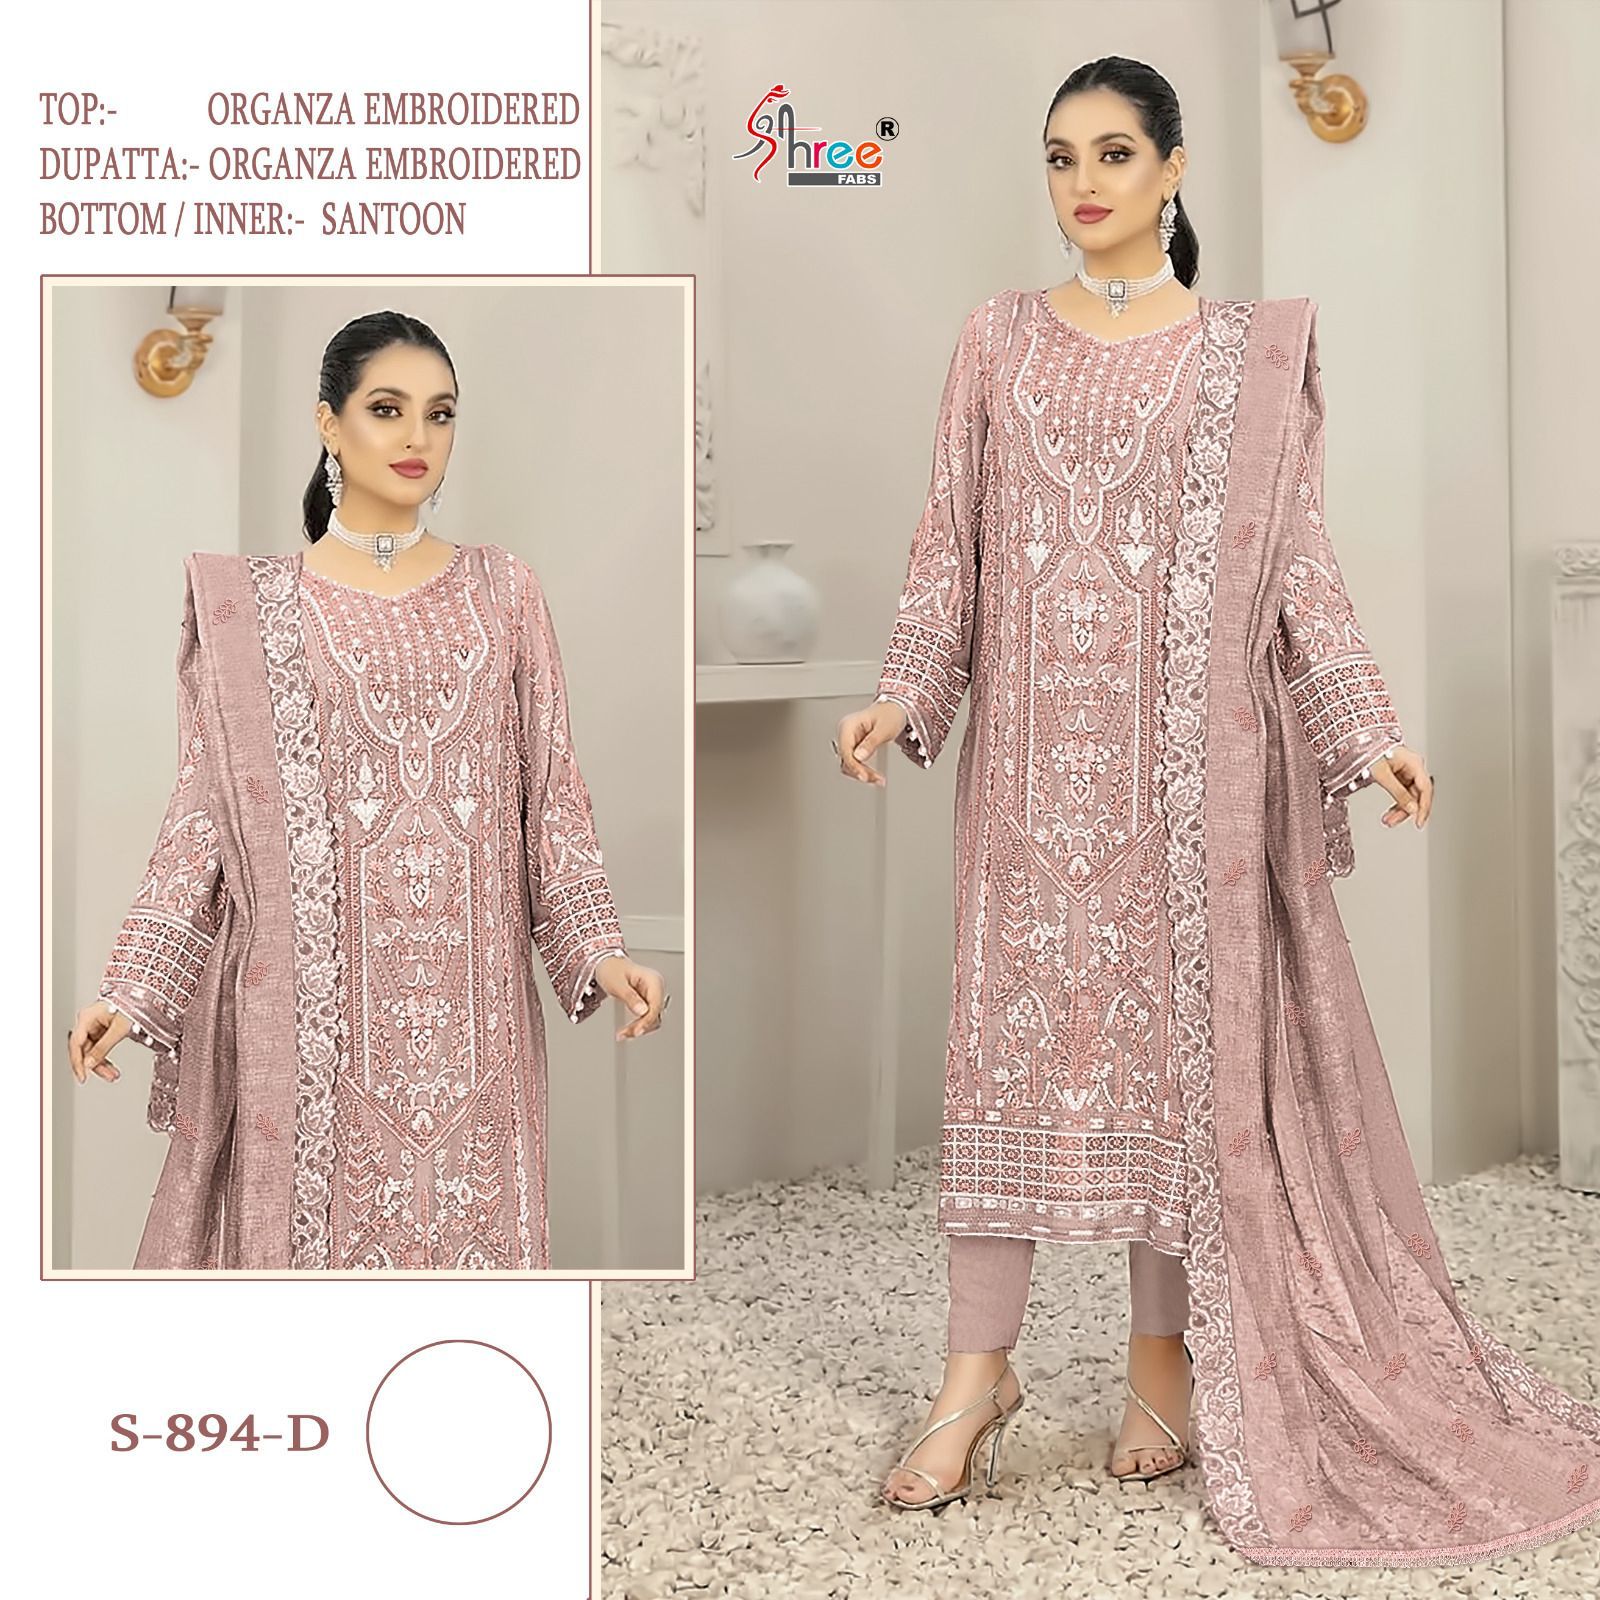 SHREE FABS S 894 SERIES PAKISTANI SUITS IN INDIA